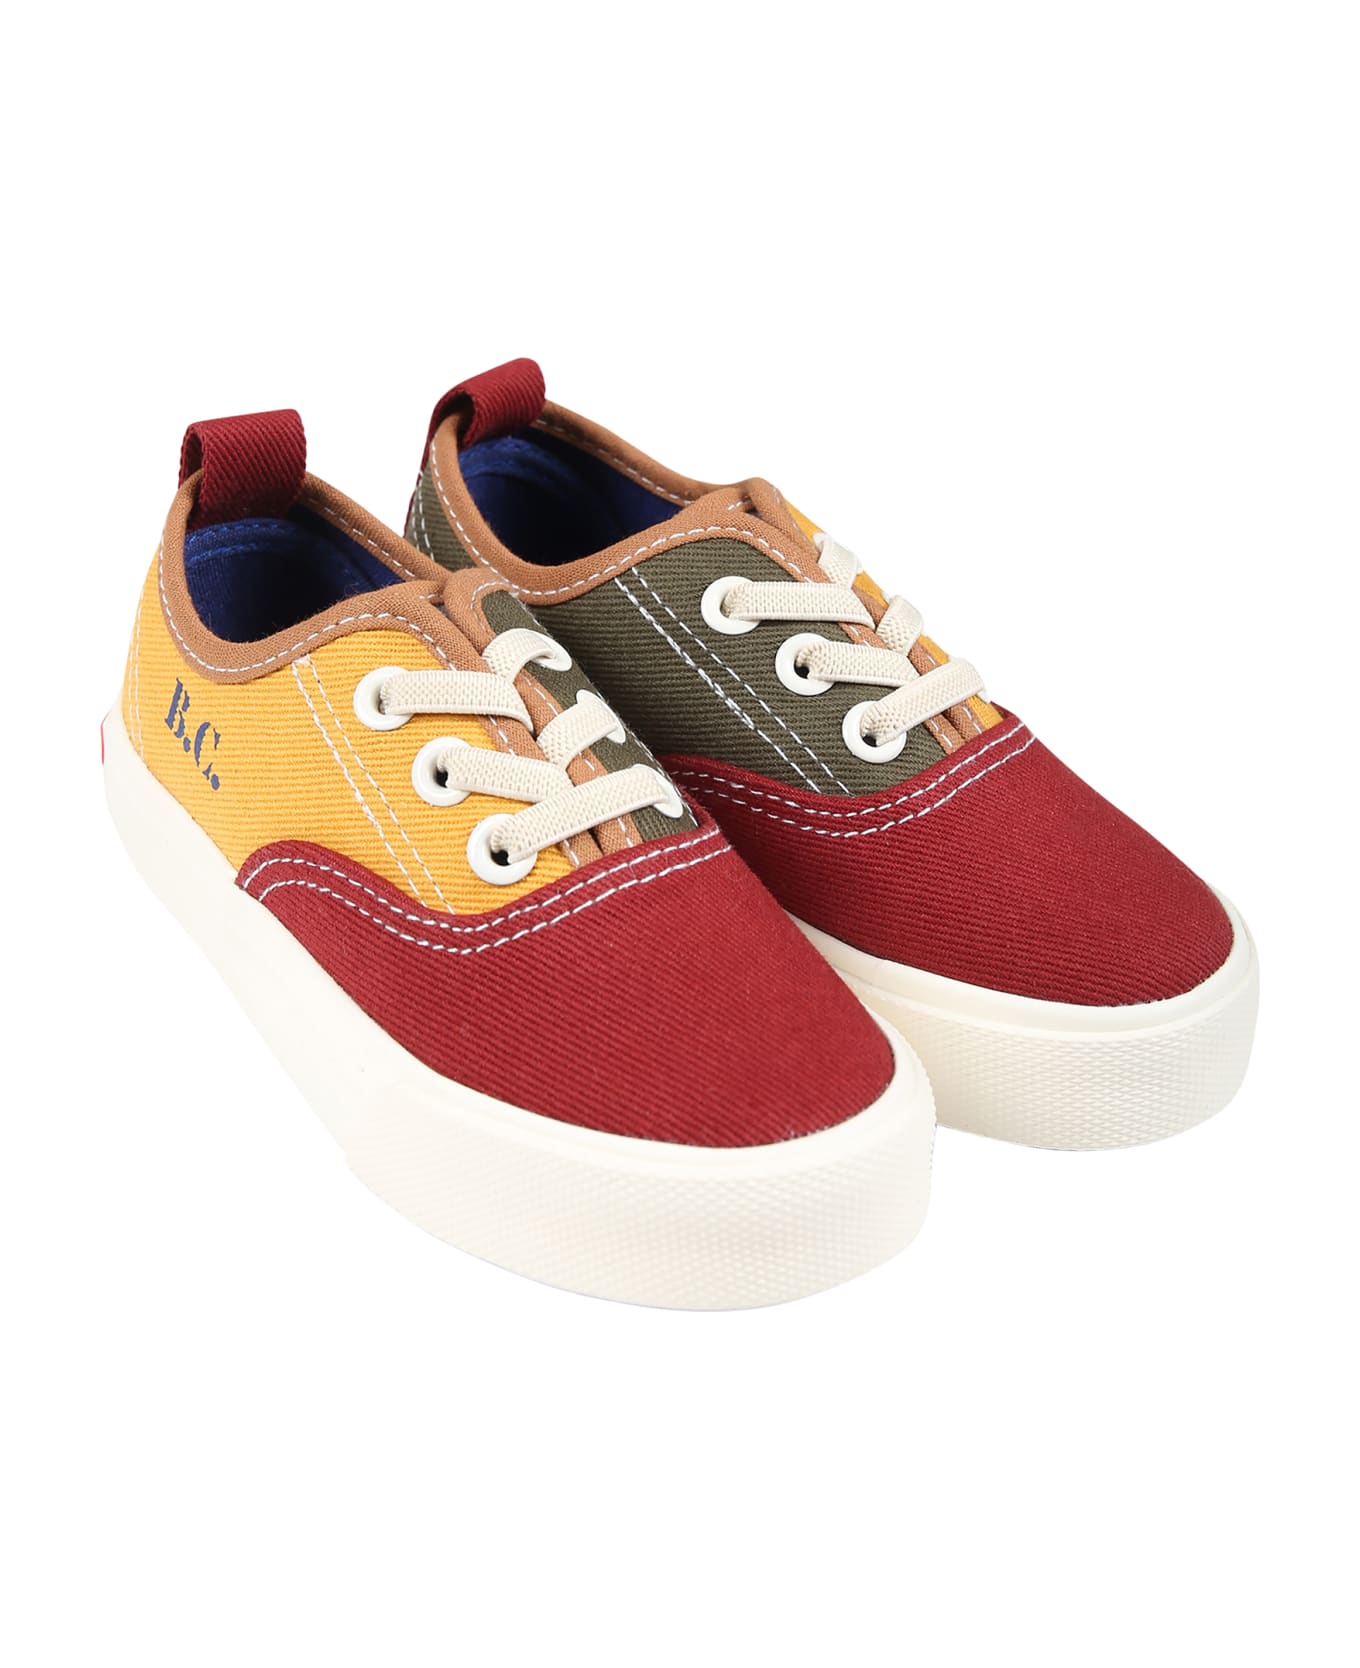 Bobo Choses Multicolor Sneakers For Kids With Logo - Multicolor シューズ